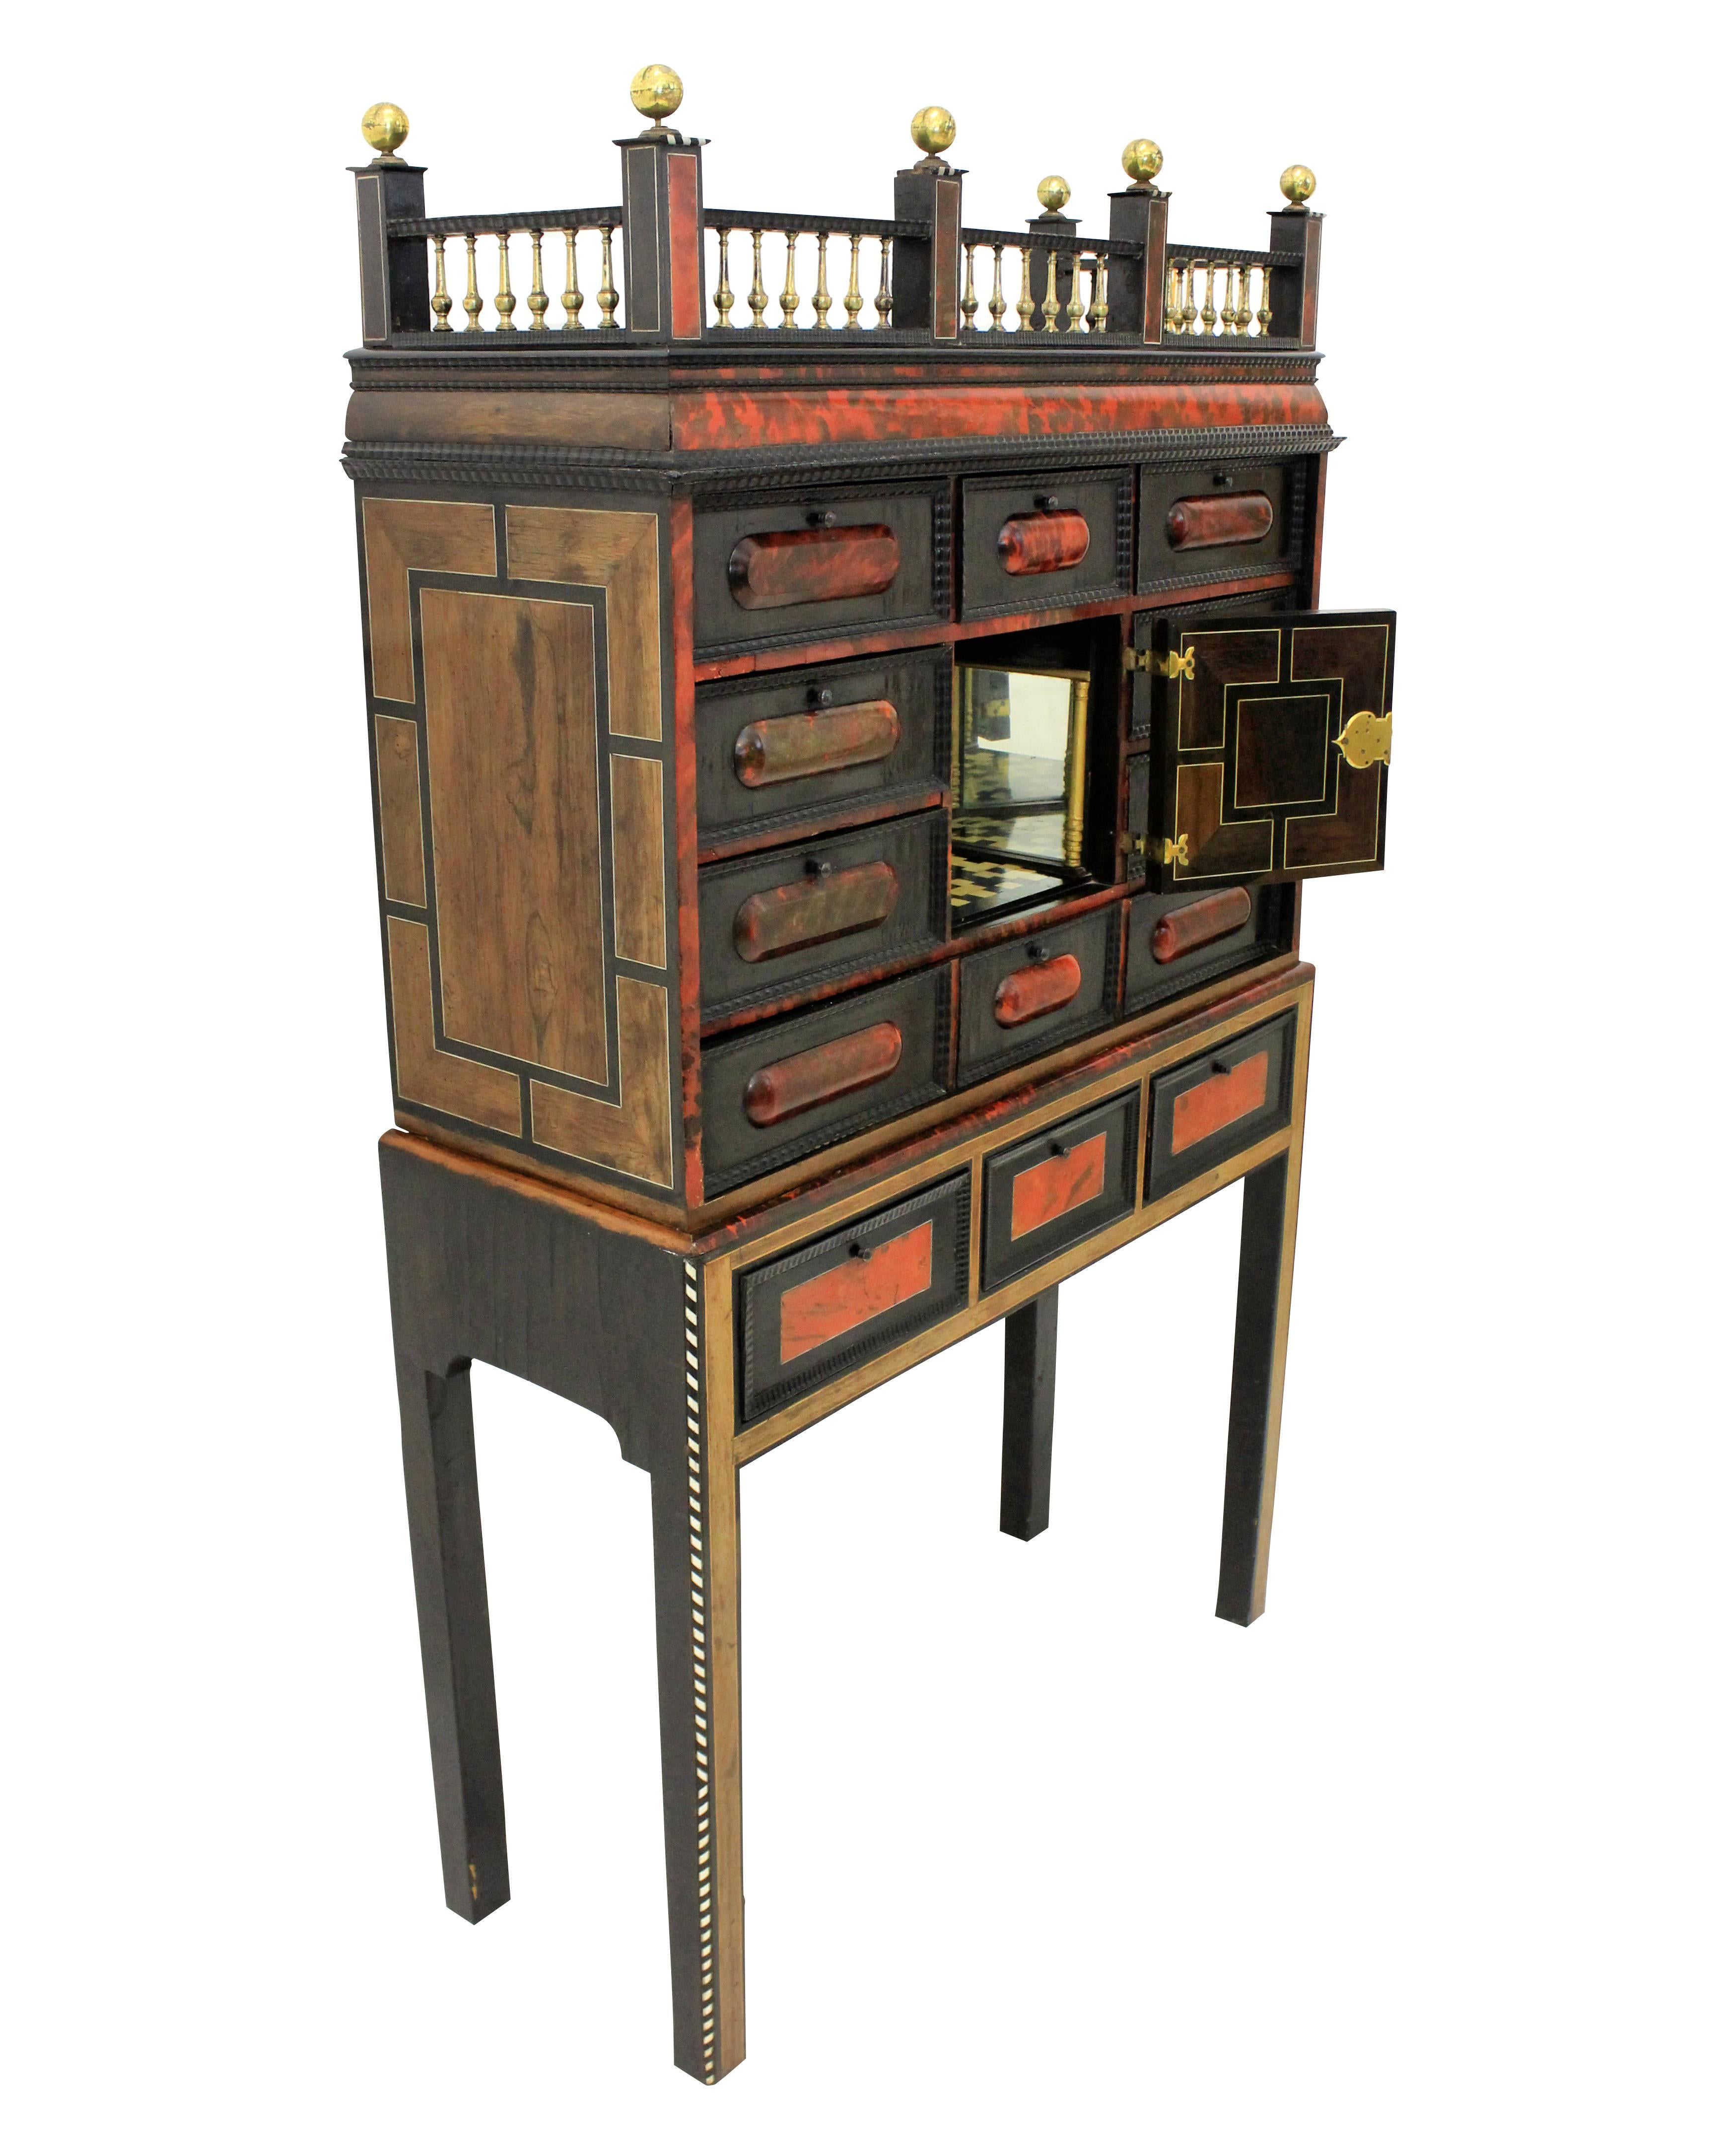 A fine late 17th century Flemish cabinet on stand. The red-stained tortoiseshell with ebony, moulded cornice and ormolu gallery, above a paneled drawer and door enclosing a fitted, perspective interior with a mirrored colonnade and chequered floor